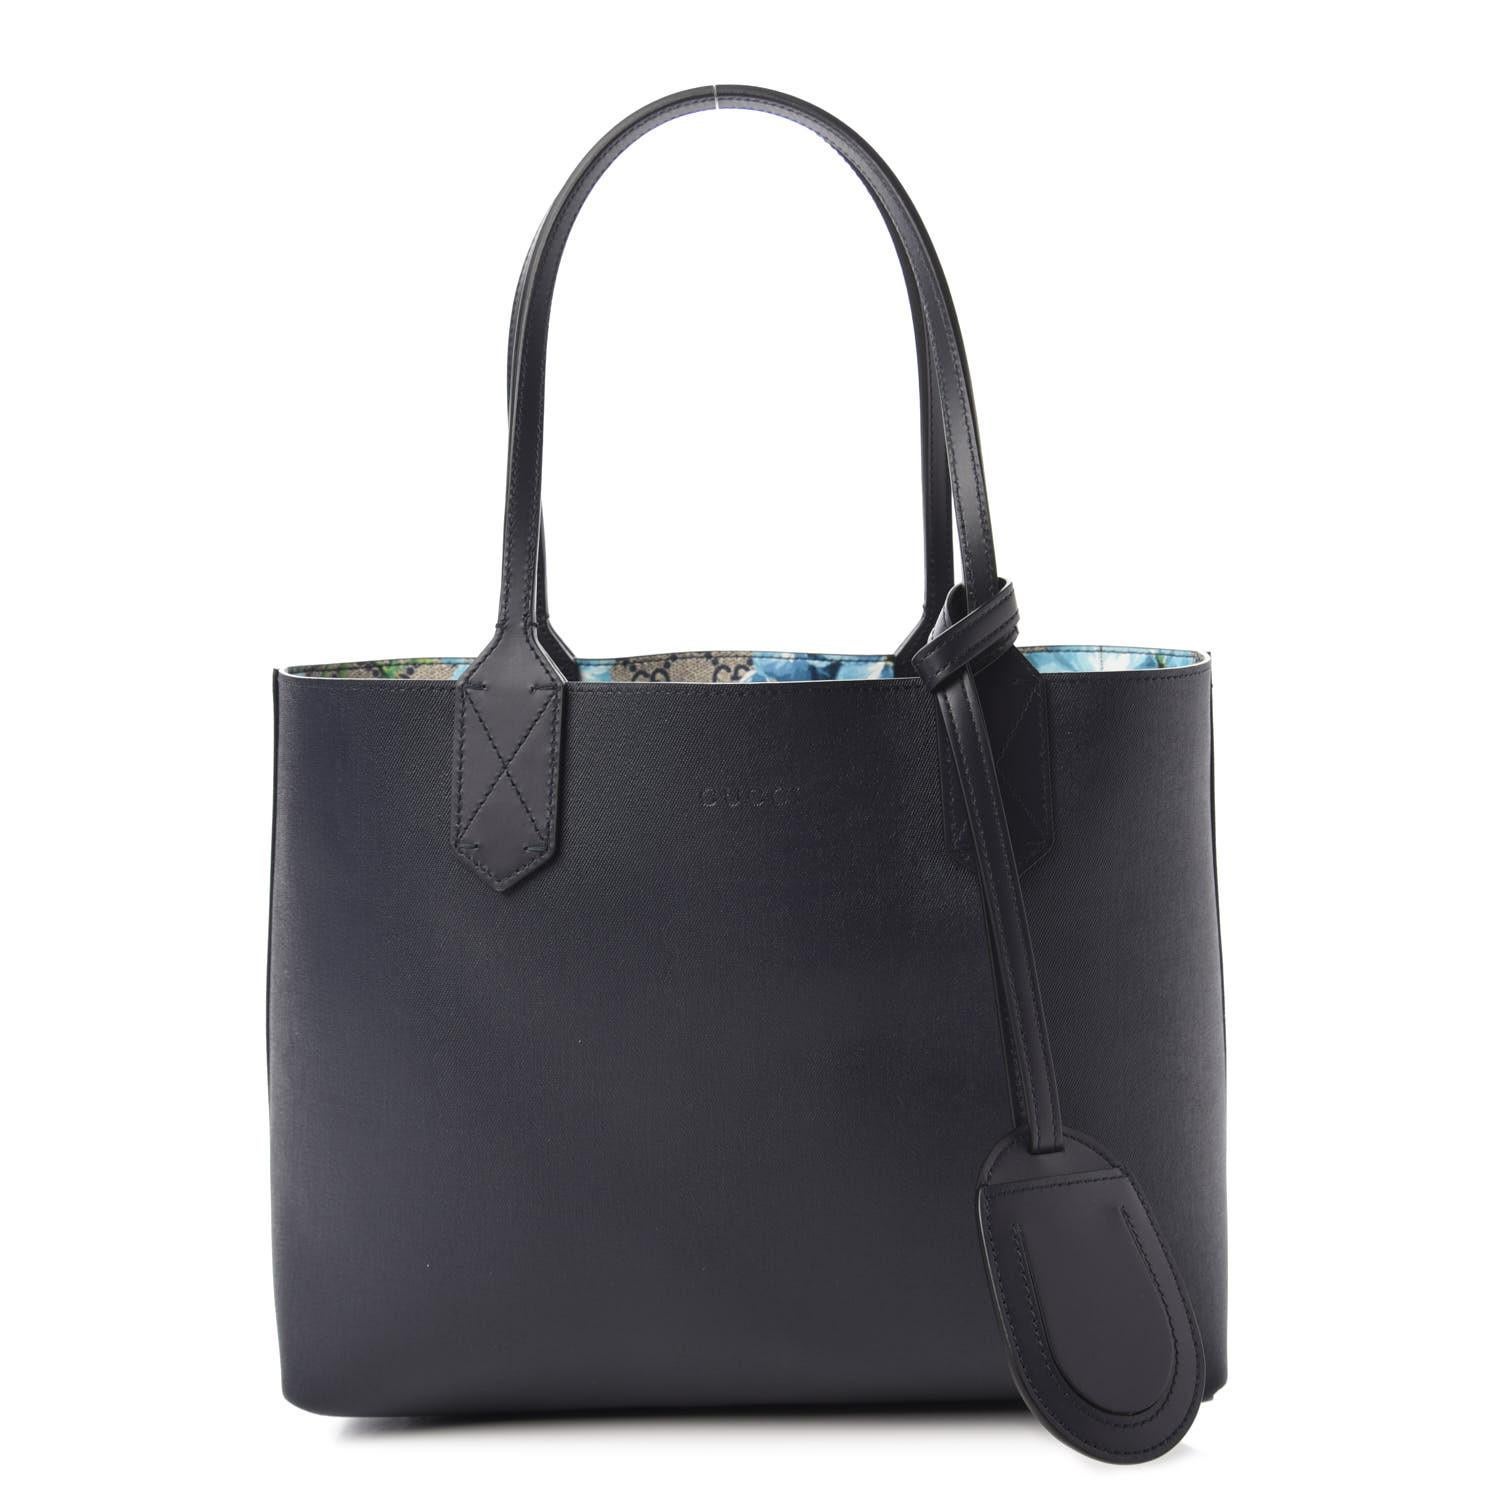 This tote is made withI GG Supreme Monogram canvas with blue and white blooming Flowers. The bag features very tall dark blue dual flat leather strap top handles. The handbag has a broad opening to a dark blue coated canvas interior that can be